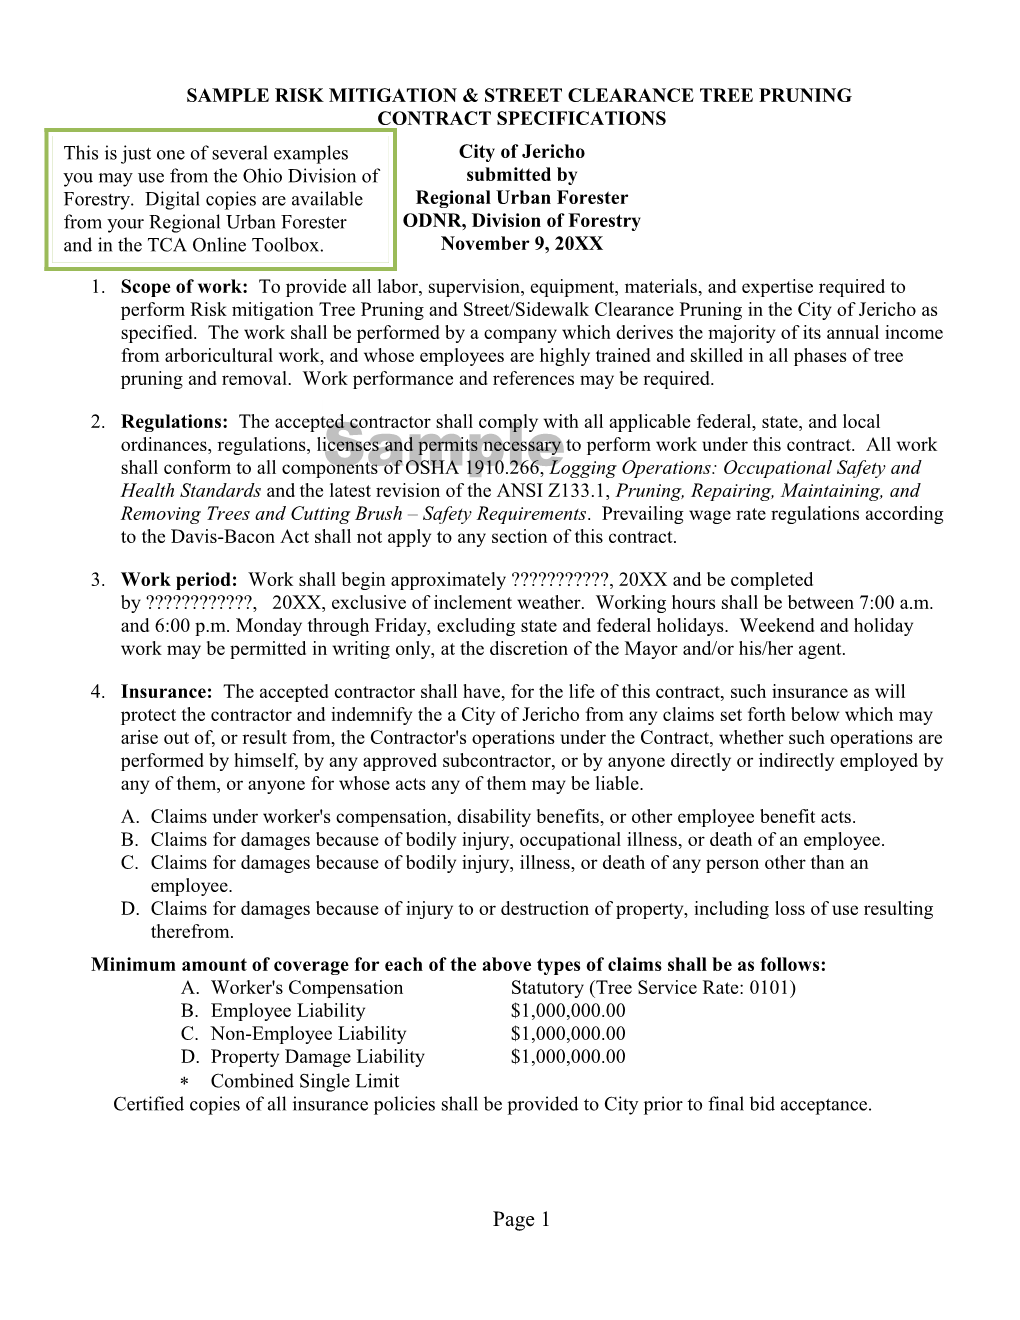 Proposed Tree Pruning Contract Specifications